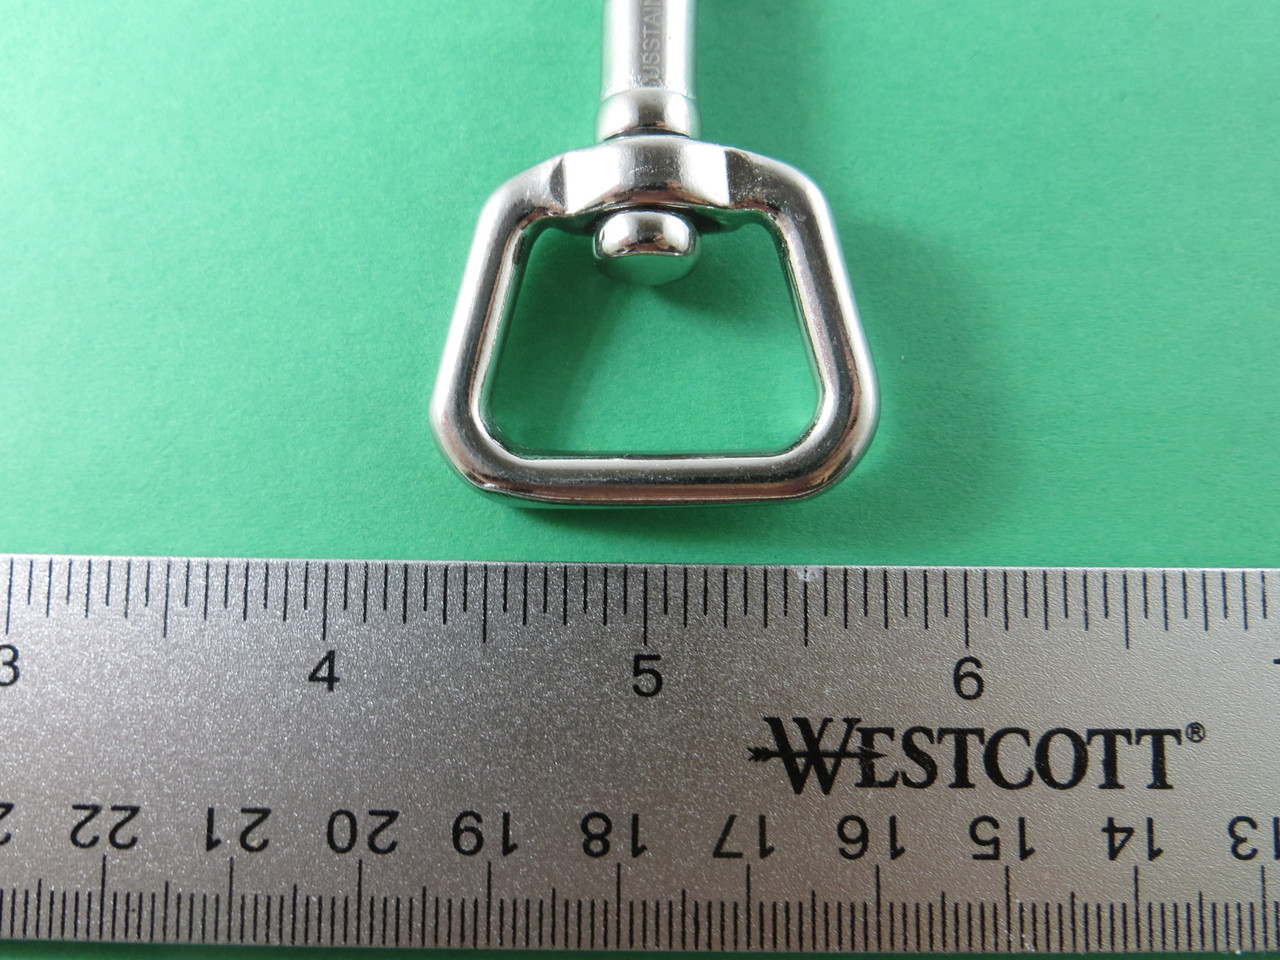 Stainless Steel 316 1 x 3 1/8 Bolt Snap Square Swivel End Marine Grade  Polished